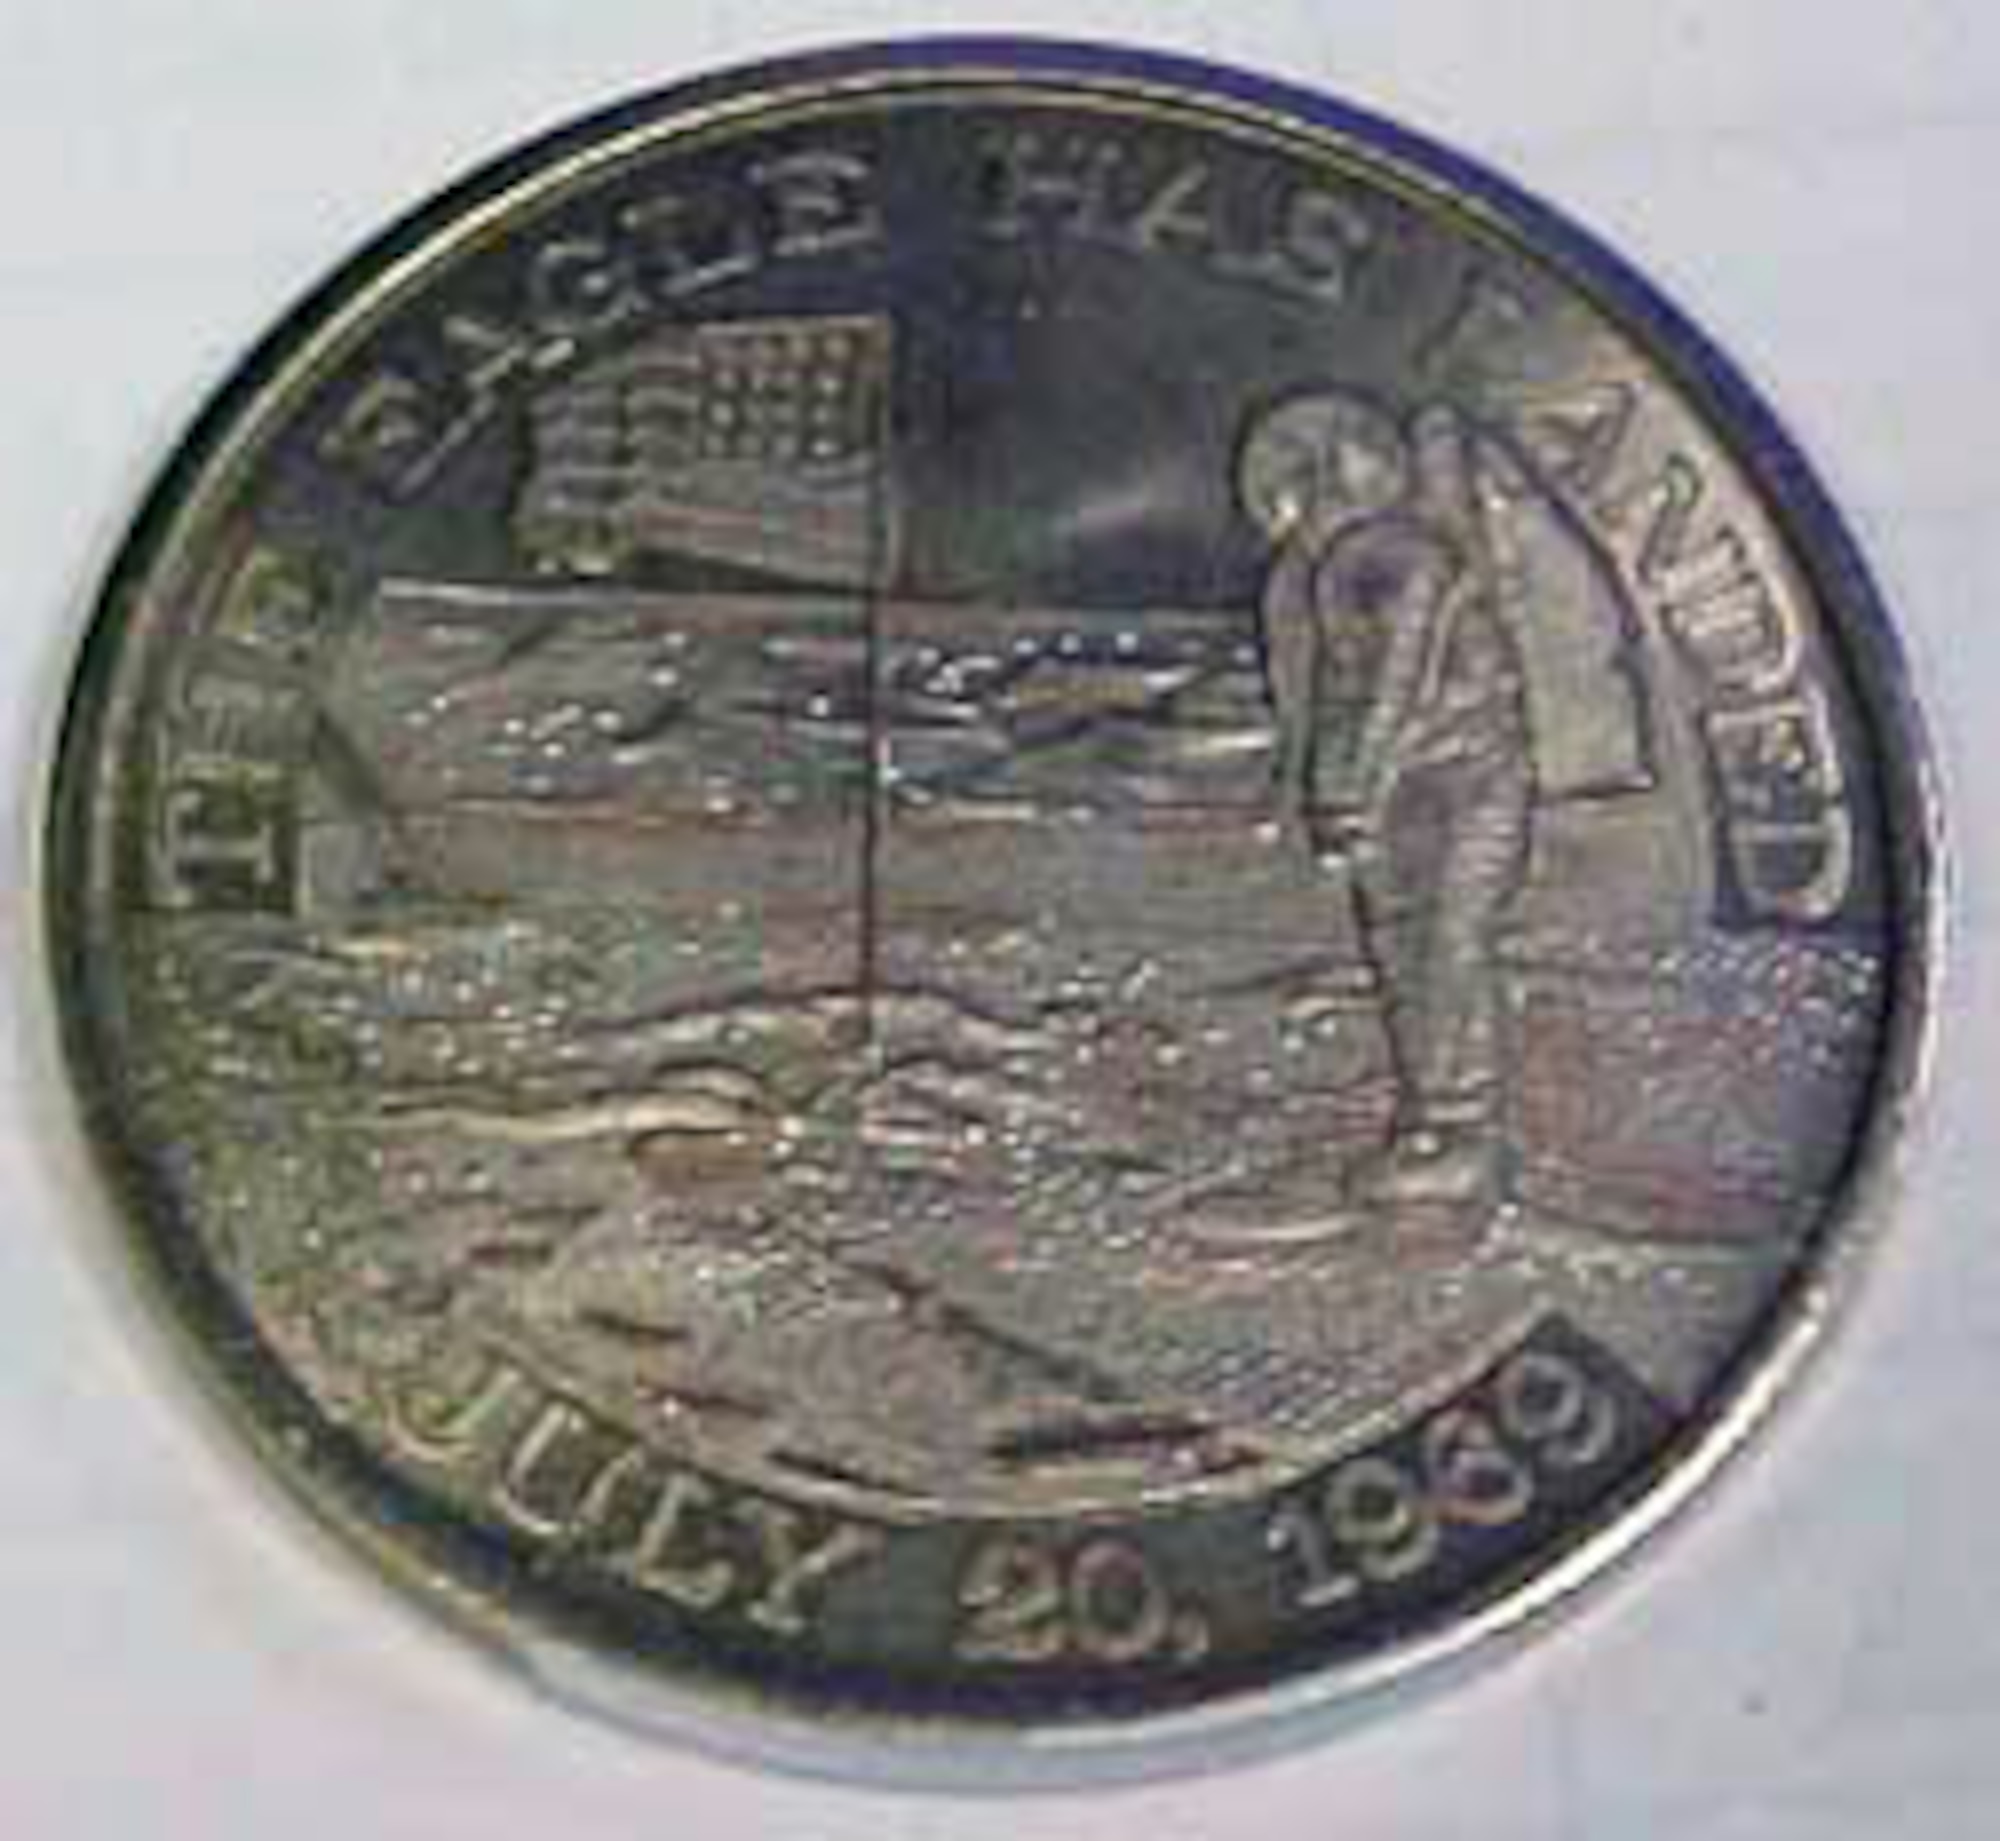 This coin commemorating the Apollo 11 mission shows an astronaut with an American flag standing on the moon's surface, along with the words "The Eagle has landed, July 20, 1969." The coin contains metal from spacecrafts Columbia and Eagle. (U.S. Air Force photo)